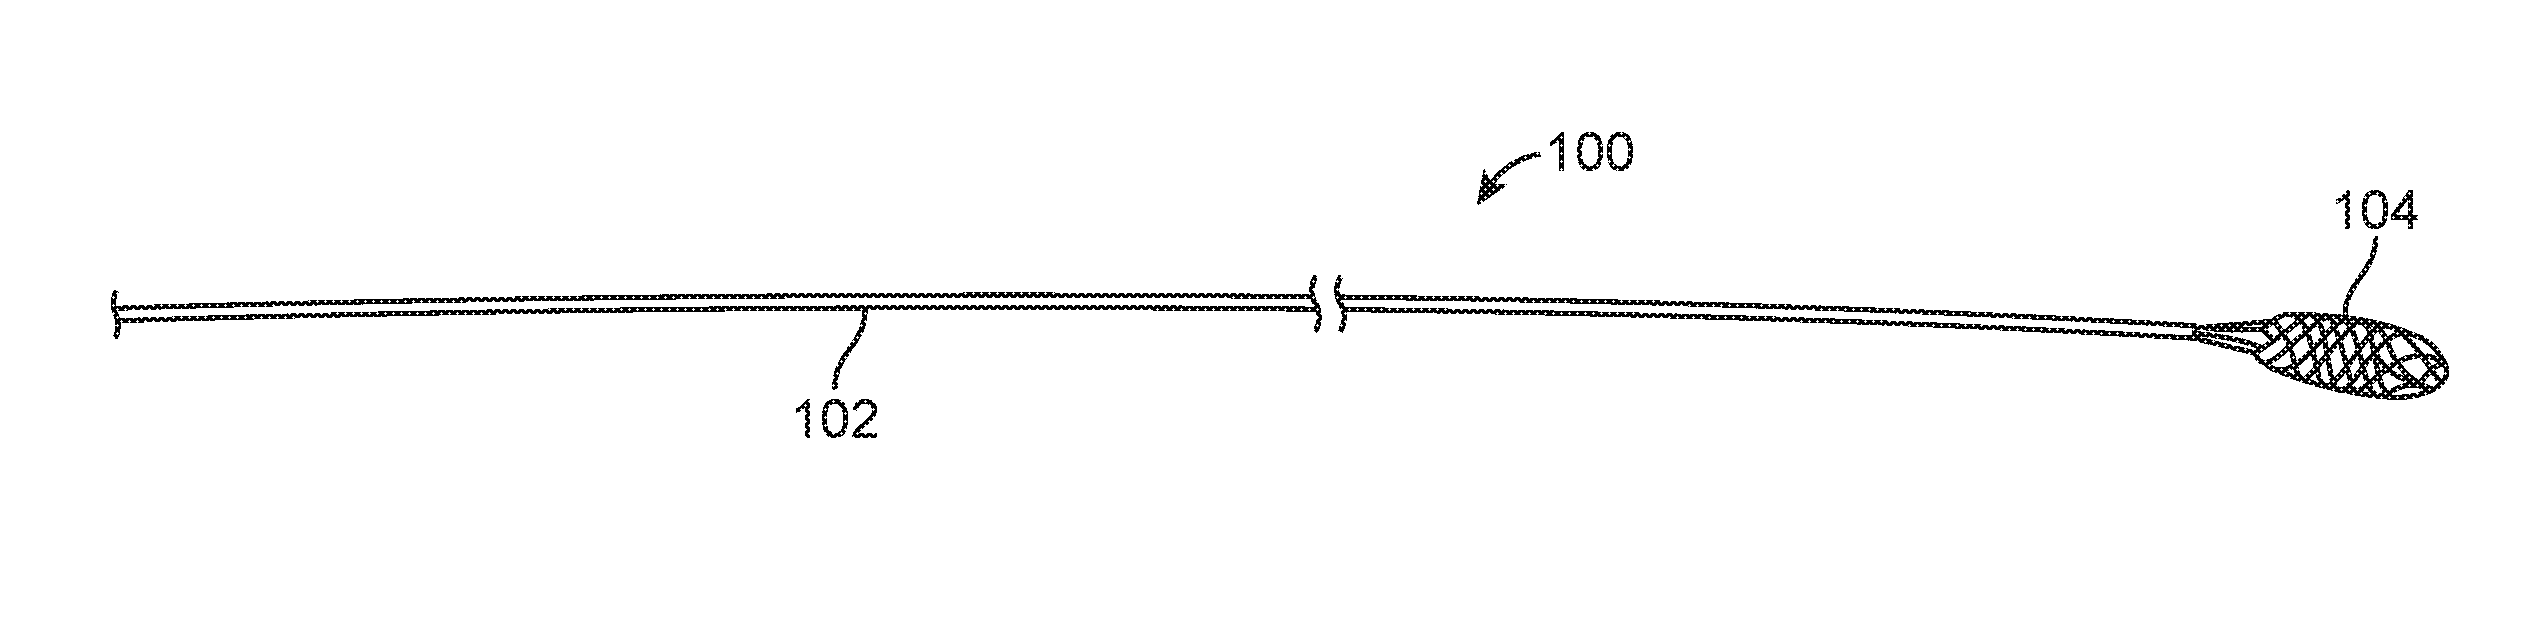 Expandable tip medical devices and methods